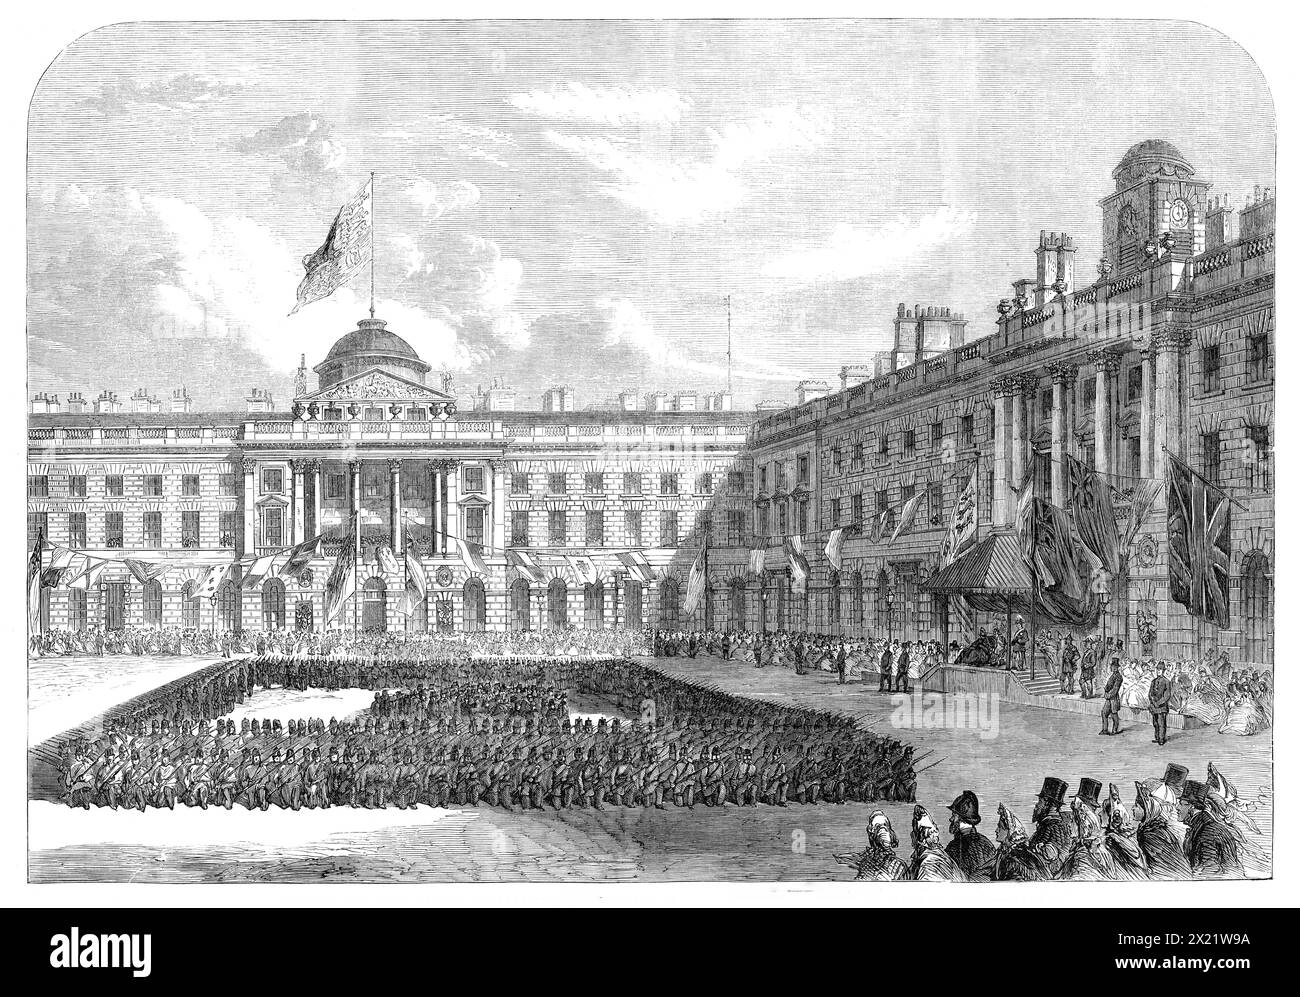 Inspection of Civil Service Volunteers by the Prince of Wales in the Quadrangle of Somerset House, [London], 1864. '...a vast quantity of coloured bunting had been employed in...the decoration of the buildings, and in the fitting up of a beautiful kiosk, with raised dais...[and] seats were arranged, accommodating a large number of spectators. The windows, and even the roofs, of the buildings were also crowded...The field state gave a total of four hundred men, of whom sixty were recruits recently passed into the line...our Artist has sketched their appearance when they had faced to the front, Stock Photo